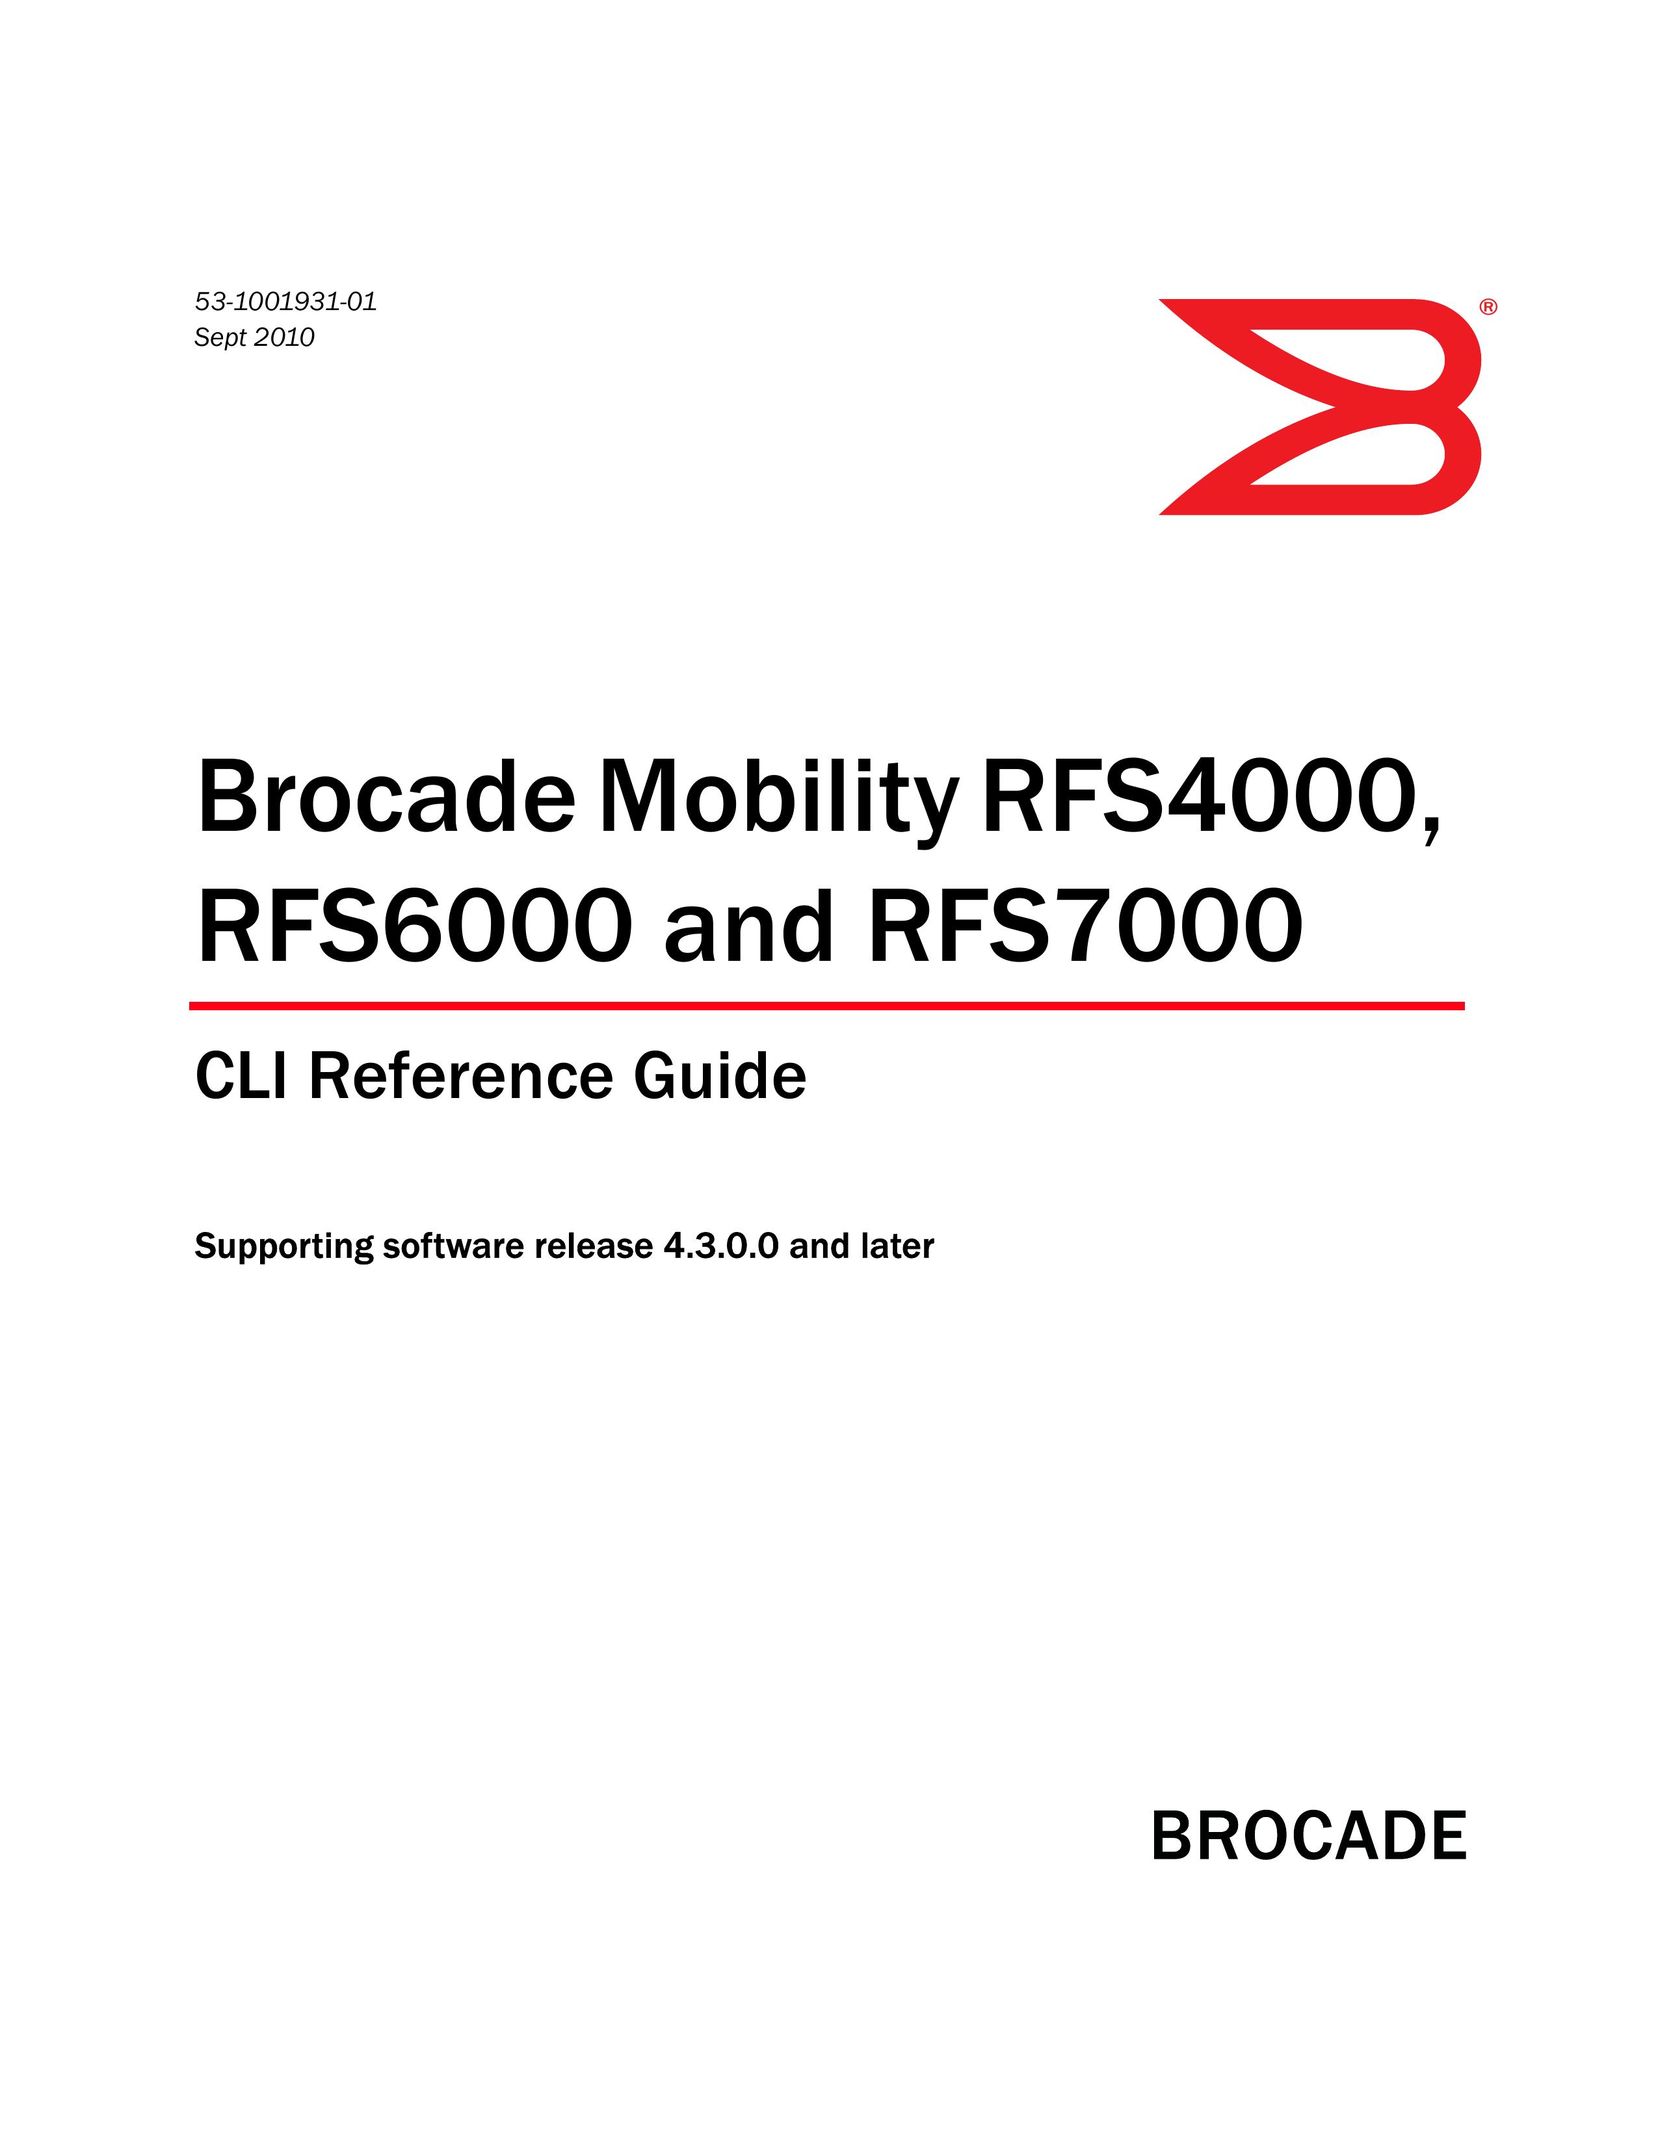 Brocade Communications Systems RFS7000 Network Router User Manual